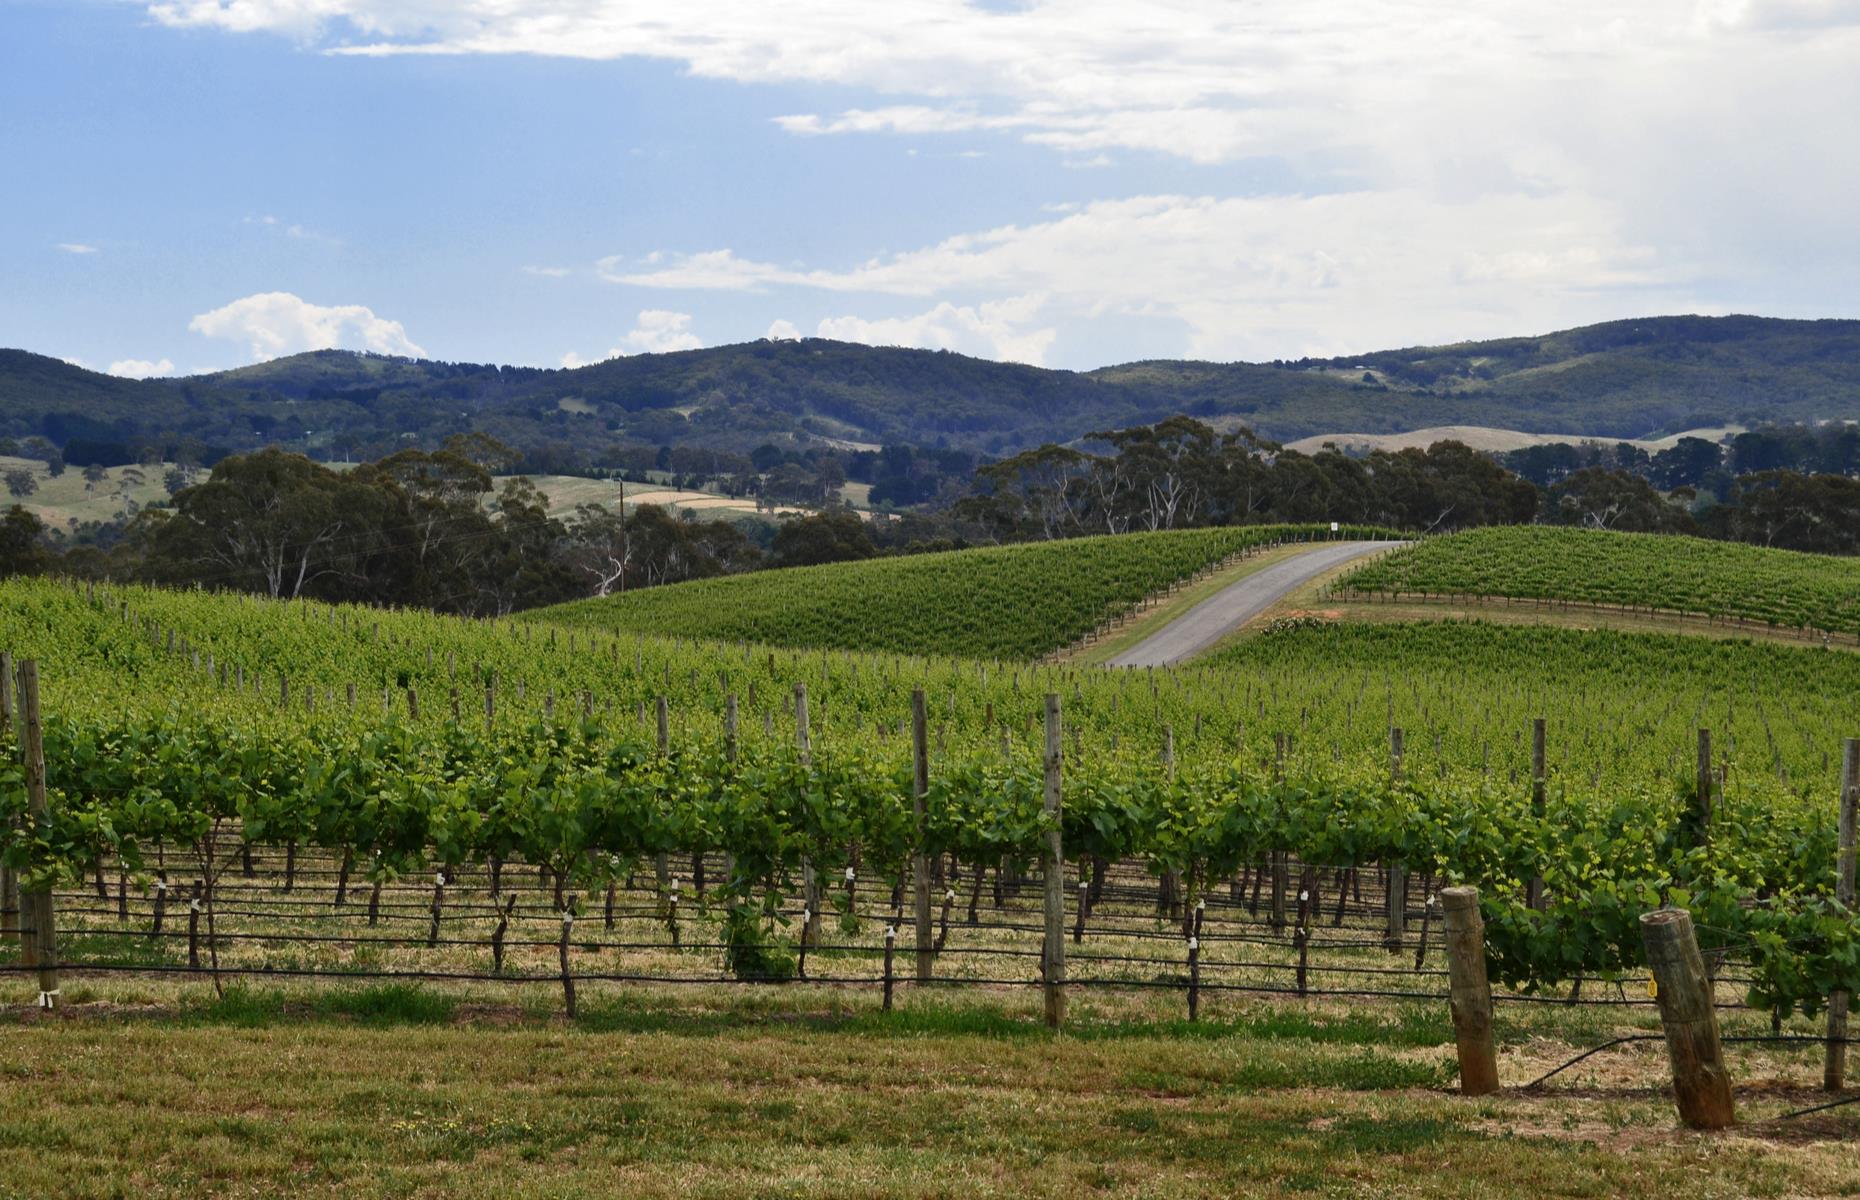 <p>As the home of some of the country’s oldest and most renowned wineries, South Australia is the state for oenophiles to navigate to. Happily, its picturesque wine regions are an easy drive from capital Adelaide (also a hot spot for wining and dining). Follow the road trip known as the <a href="https://southaustralia.com/travel-blog/epicurean-way-road-trip">Epicurean Way</a> to get your fill of the state's top drops and gourmet delights as you spend three days meandering around the vineyards, villages, farmers' markets and restaurants of four fantastic wine regions: McLaren Vale, Adelaide Hills, Barossa and Clare Valley.</p>  <p><strong><a href="https://www.facebook.com/loveexploringUK?utm_source=msn&utm_medium=social&utm_campaign=front">Love this? See our Facebook page for more travel inspiration</a></strong></p>